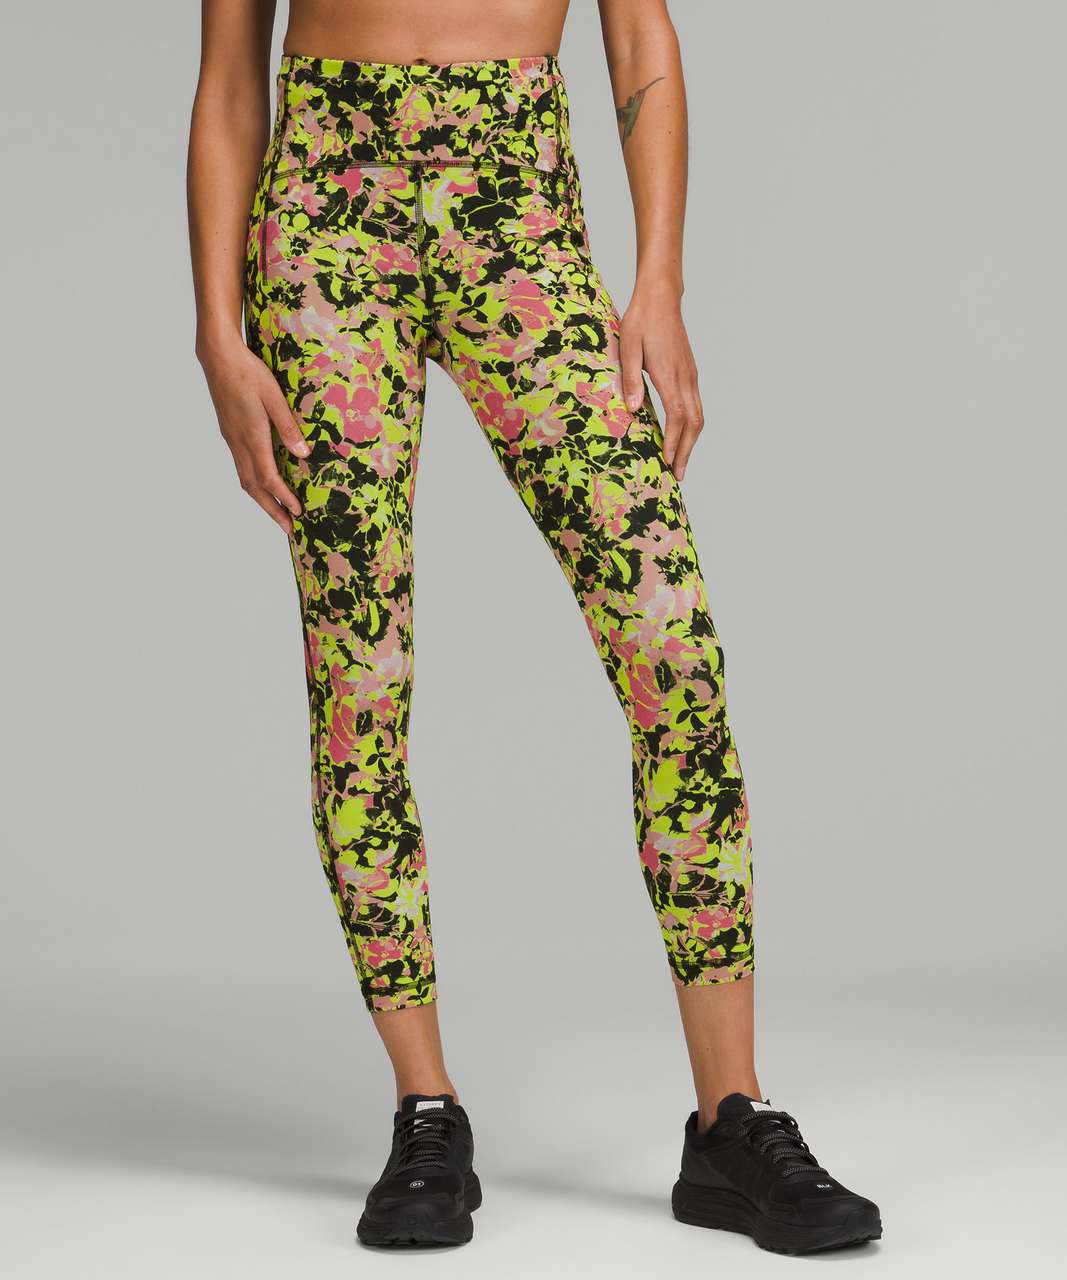 Lululemon Swift Speed High-Rise Tight 25" - Inflect Floral Highlight Yellow Multi